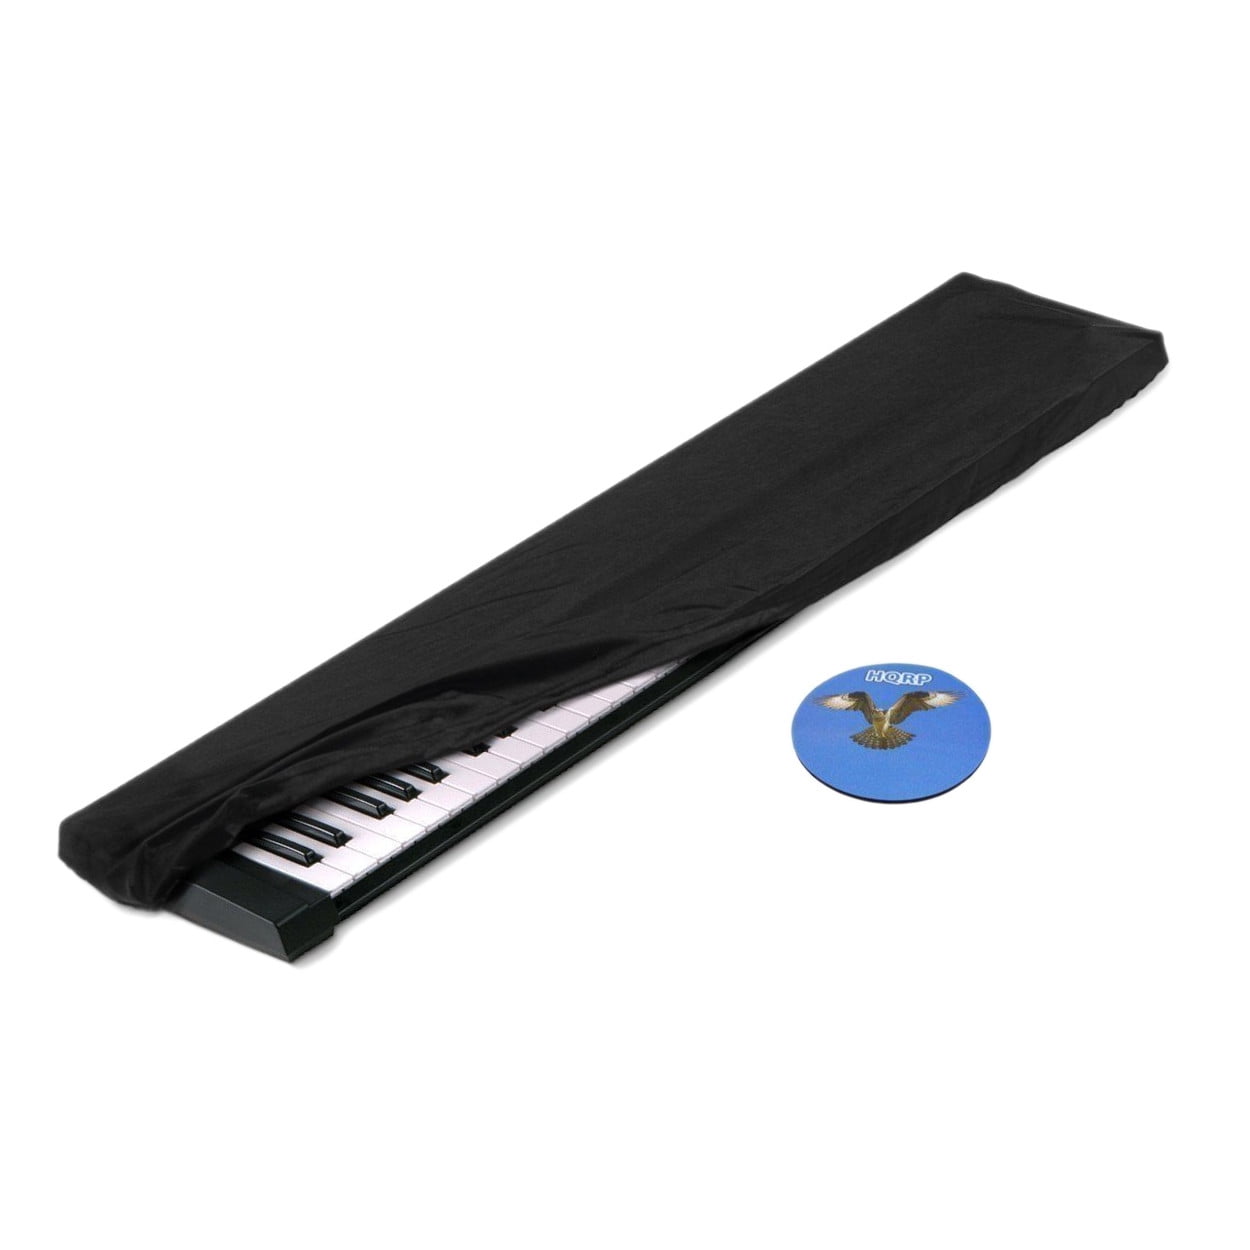 Screen protector for KORG PA4X Keyboard Display and Volume make it beautifully